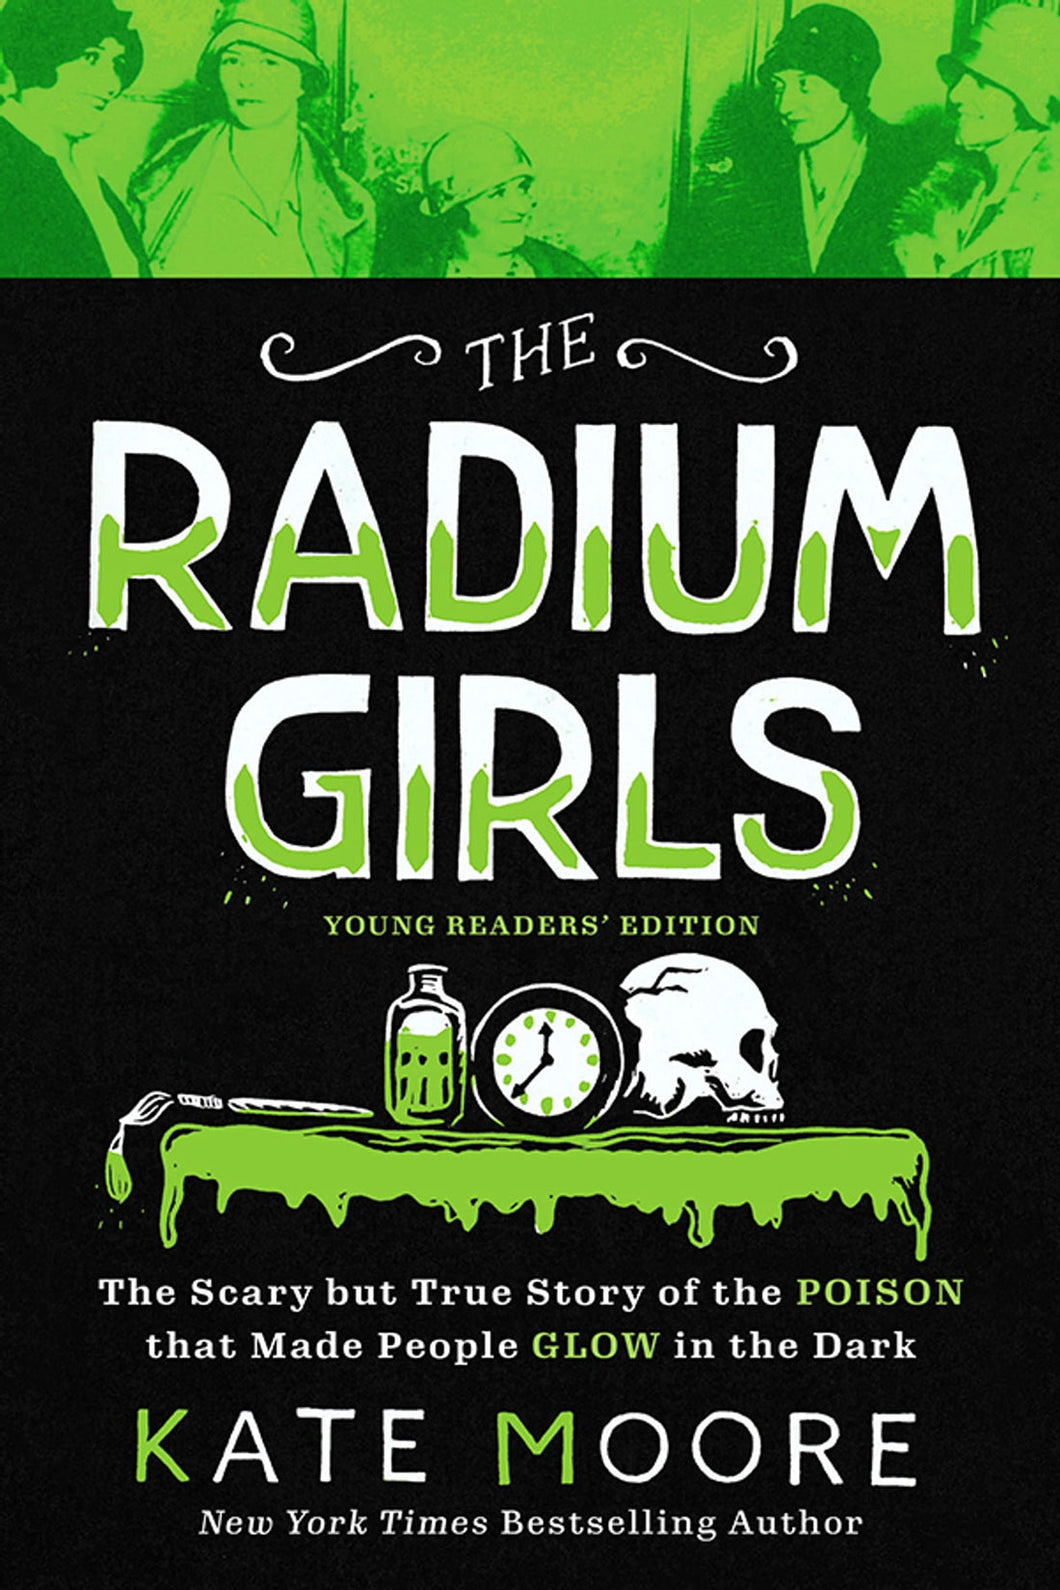 The Radium Girls by Kate Moore - Young Reader's Edition / BOOK OR BUNDLE - Starting at $11!